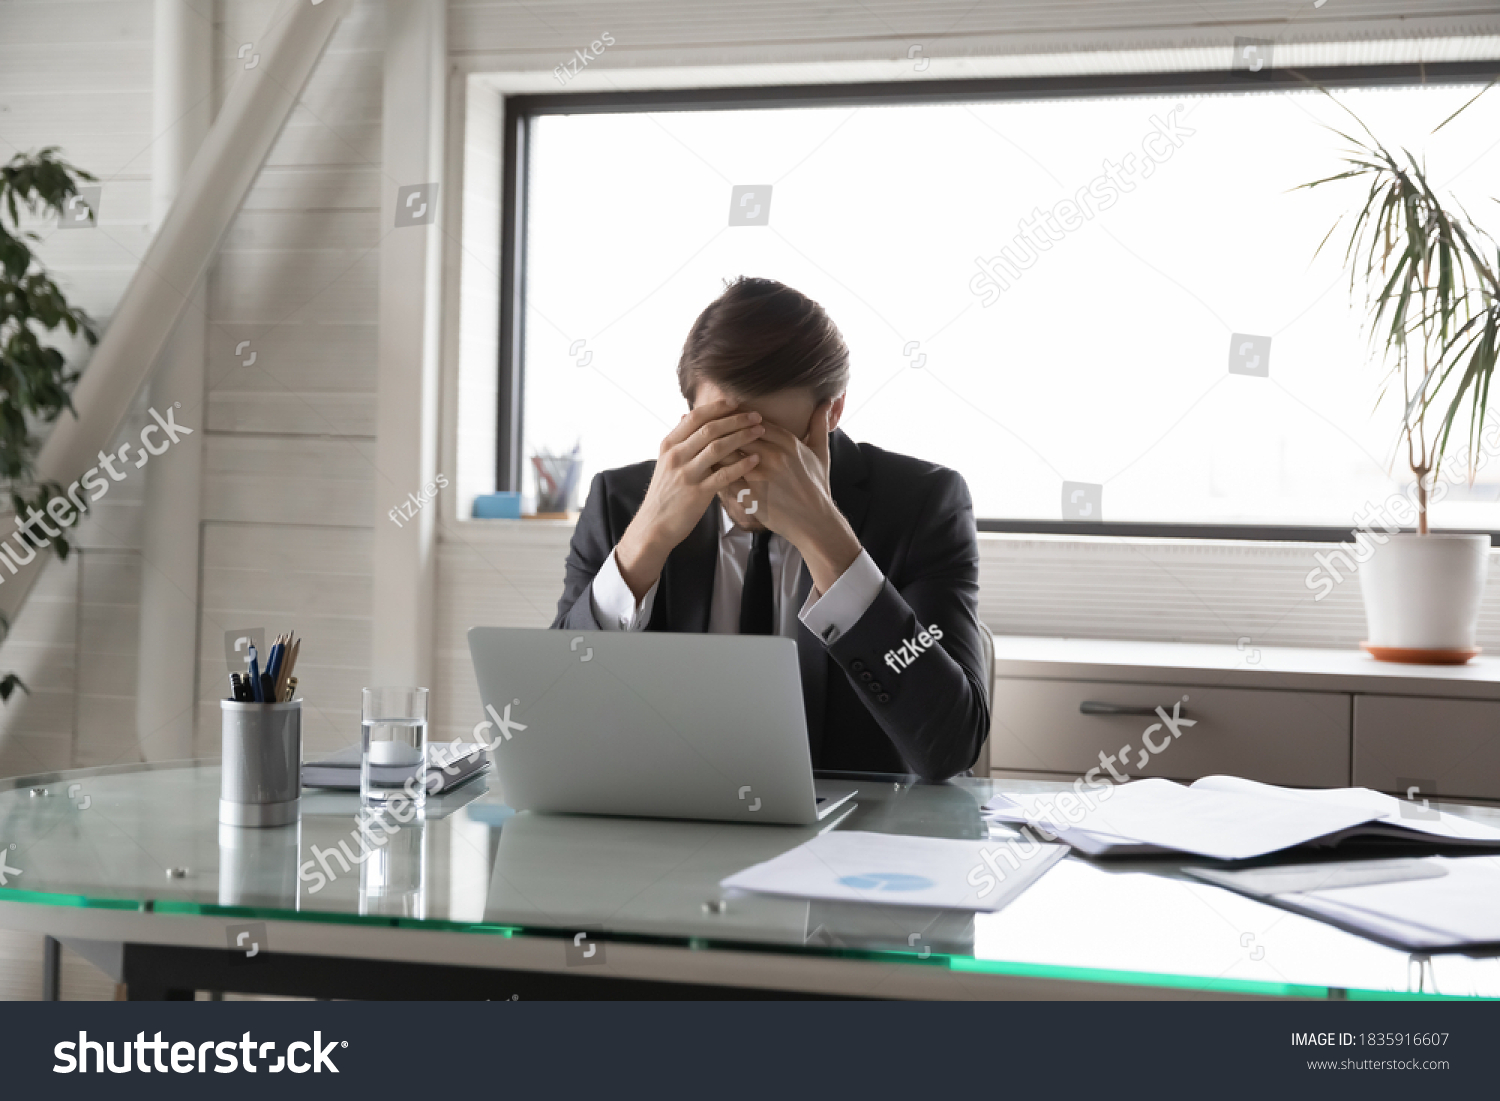 Unhappy young male manager covering head with hands, suffering from pressure at work or feeling unwell due to overload. Overworked stressed businessman workaholic having headache, needs rest. #1835916607